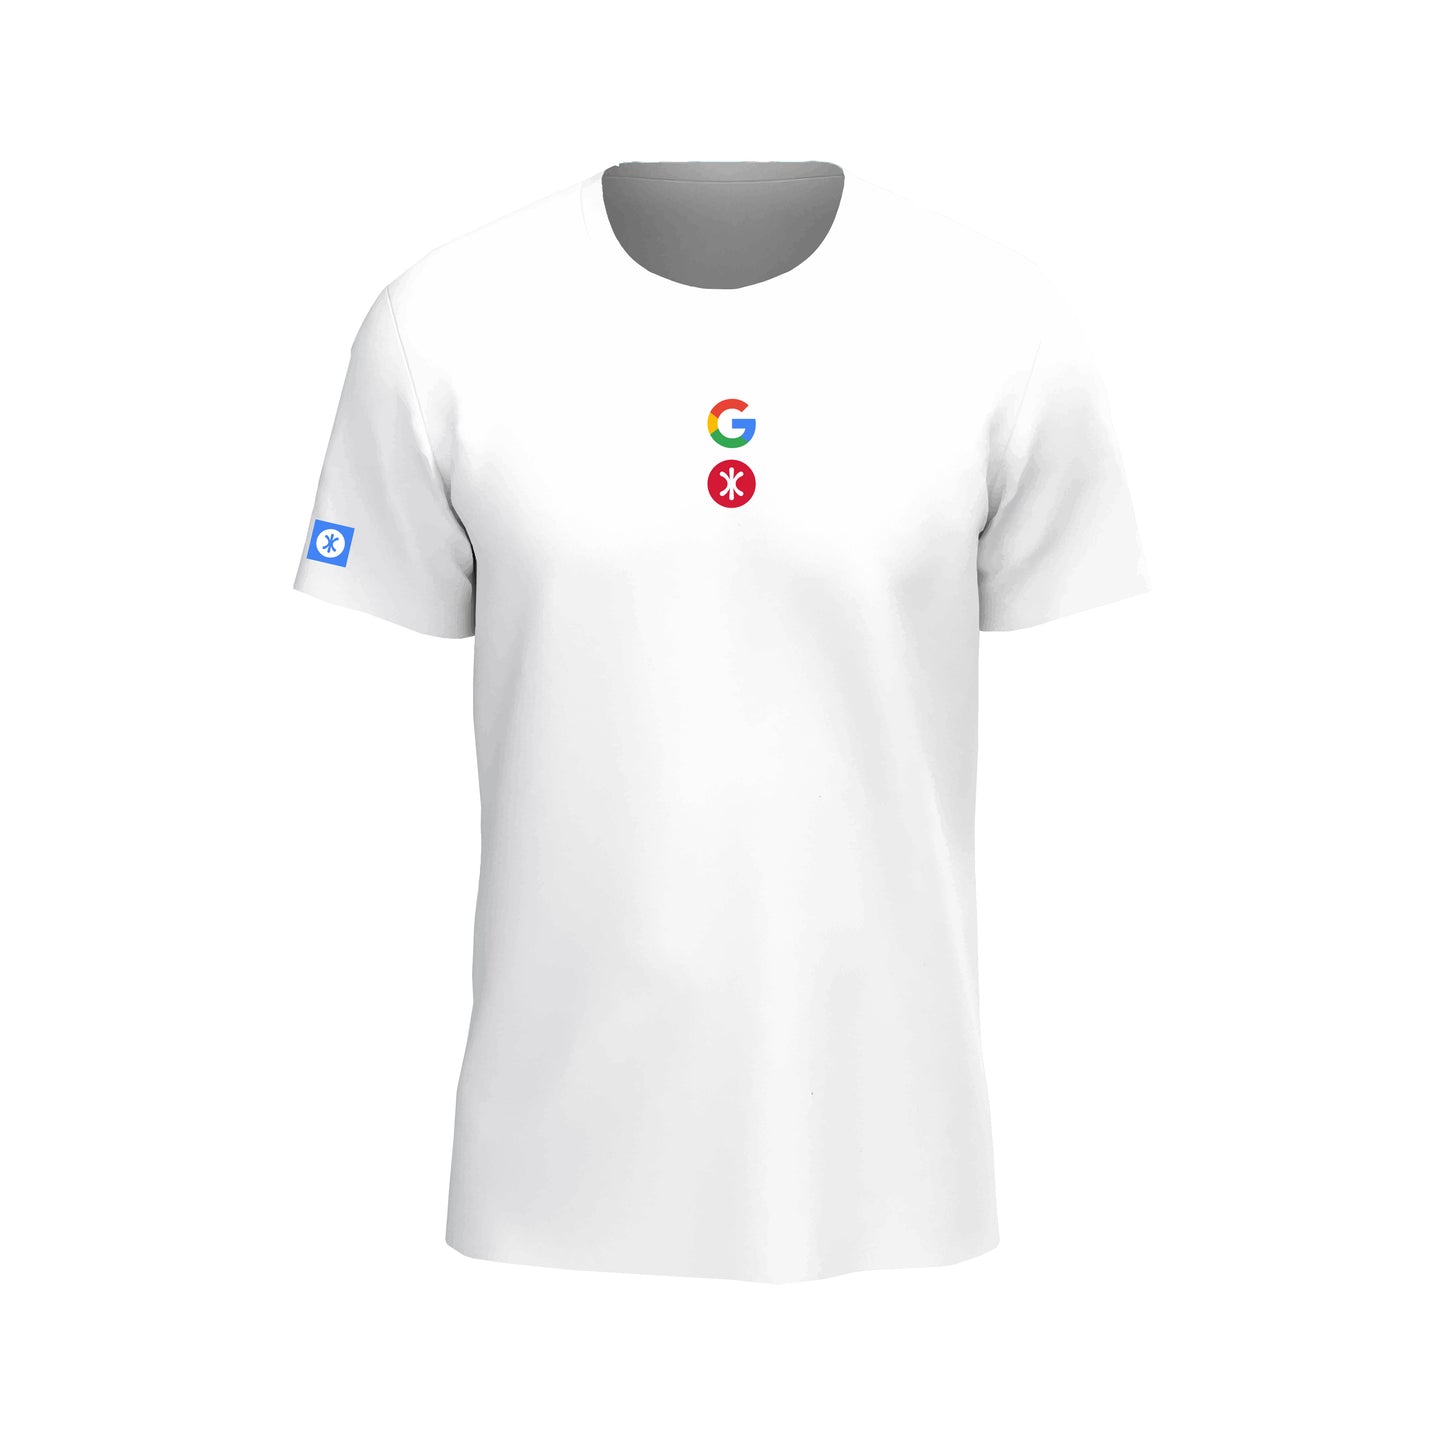 Google - Earth Force ® T-Shirt by Athletic Forces -  Model 2